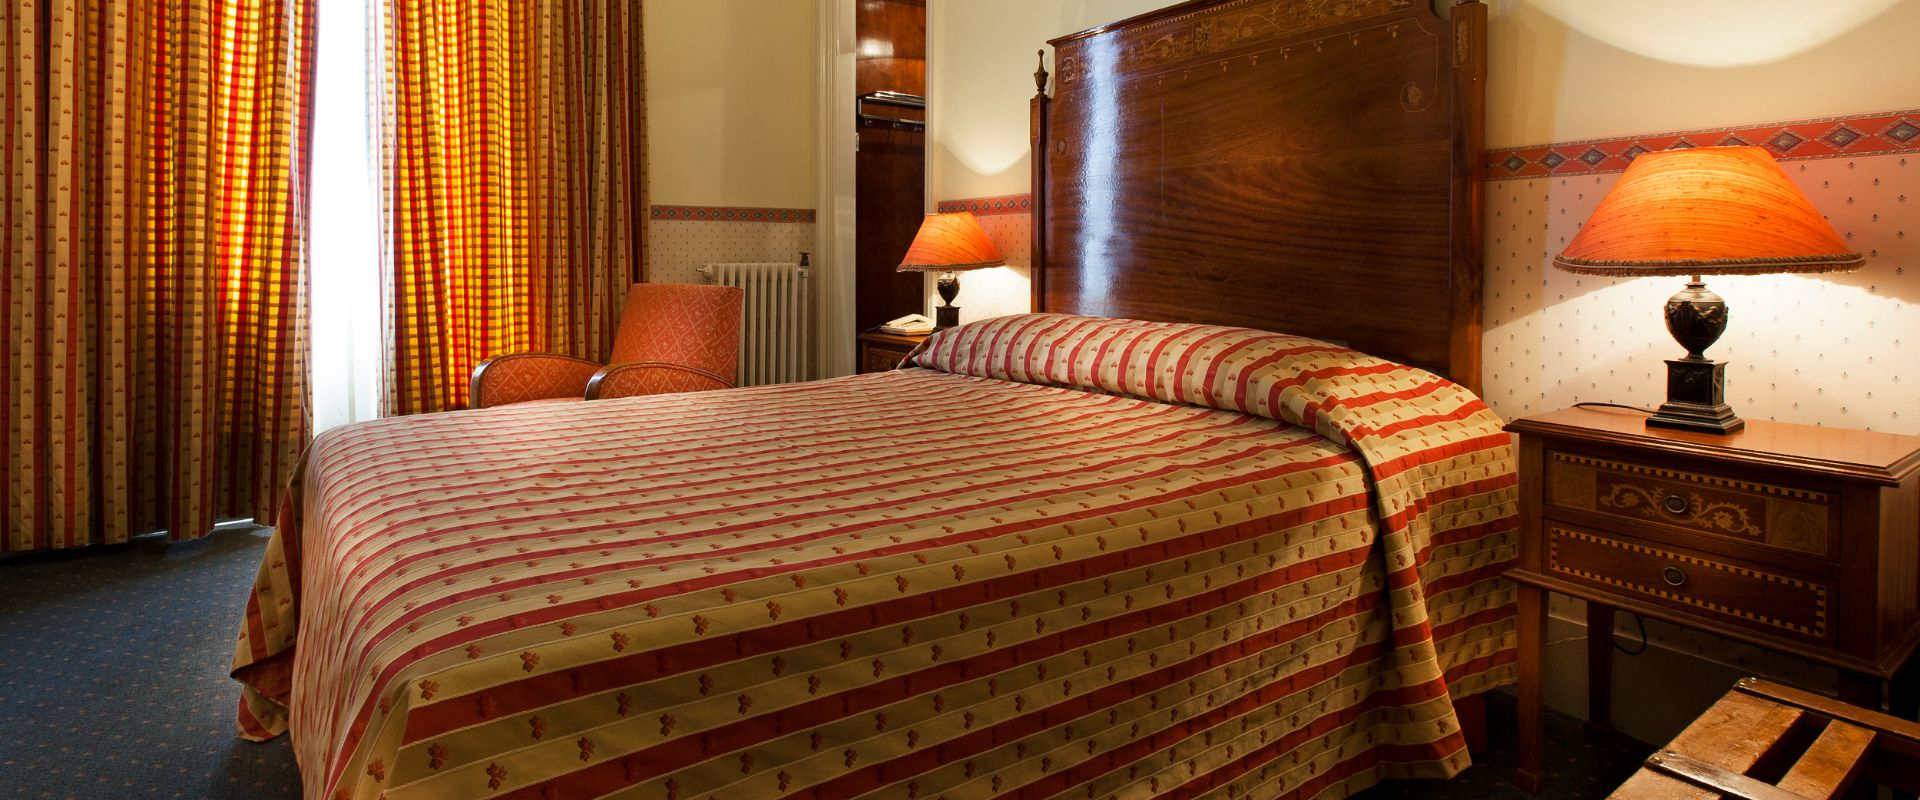 Superior room with extra bed  Palace Hotel Bussaco Coimbra